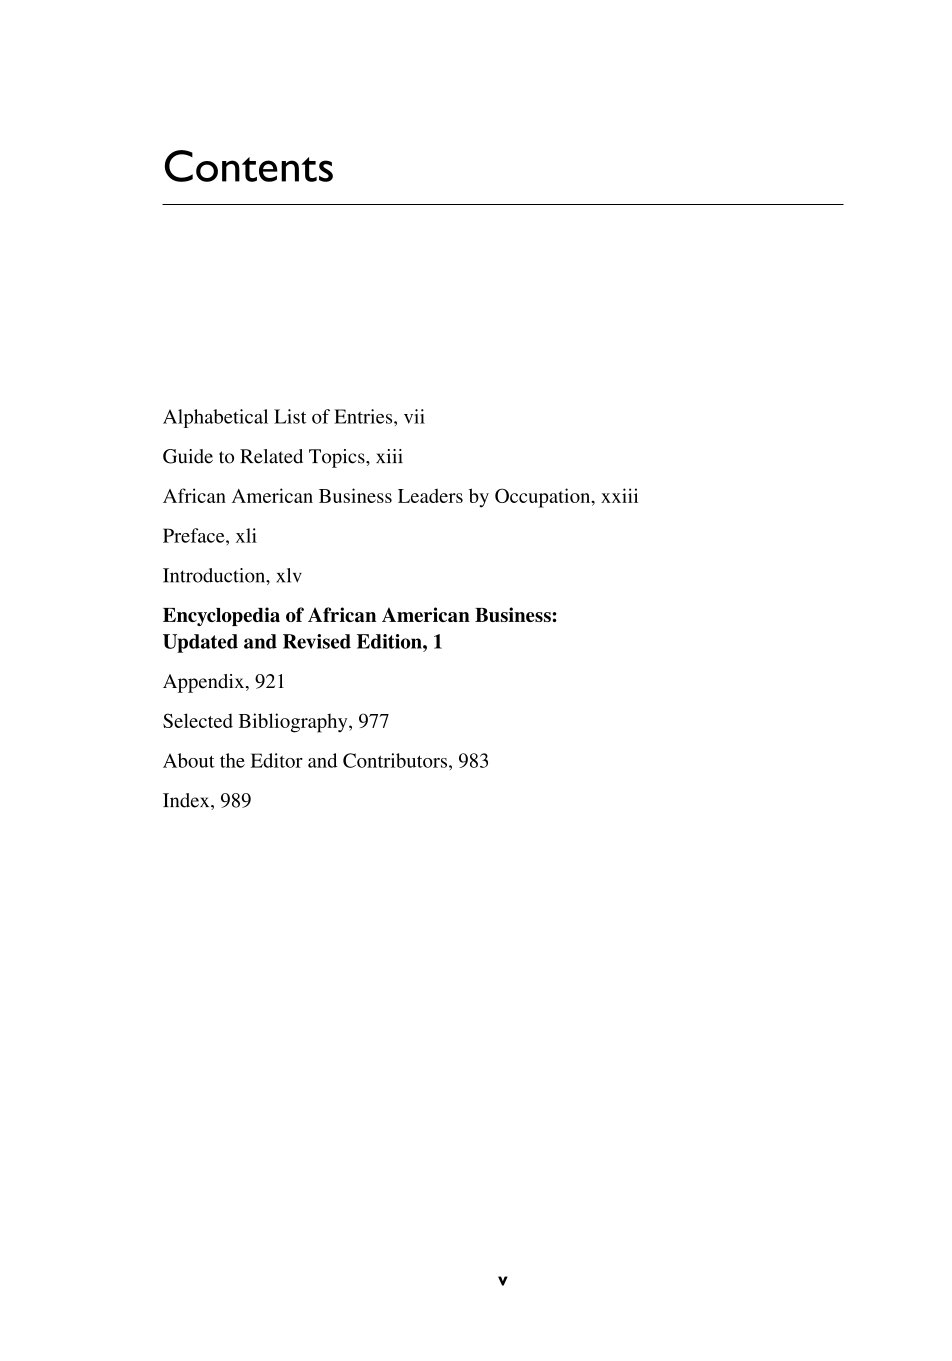 Encyclopedia of African American Business: Updated and Revised Edition, 2nd Edition [2 volumes] page v1